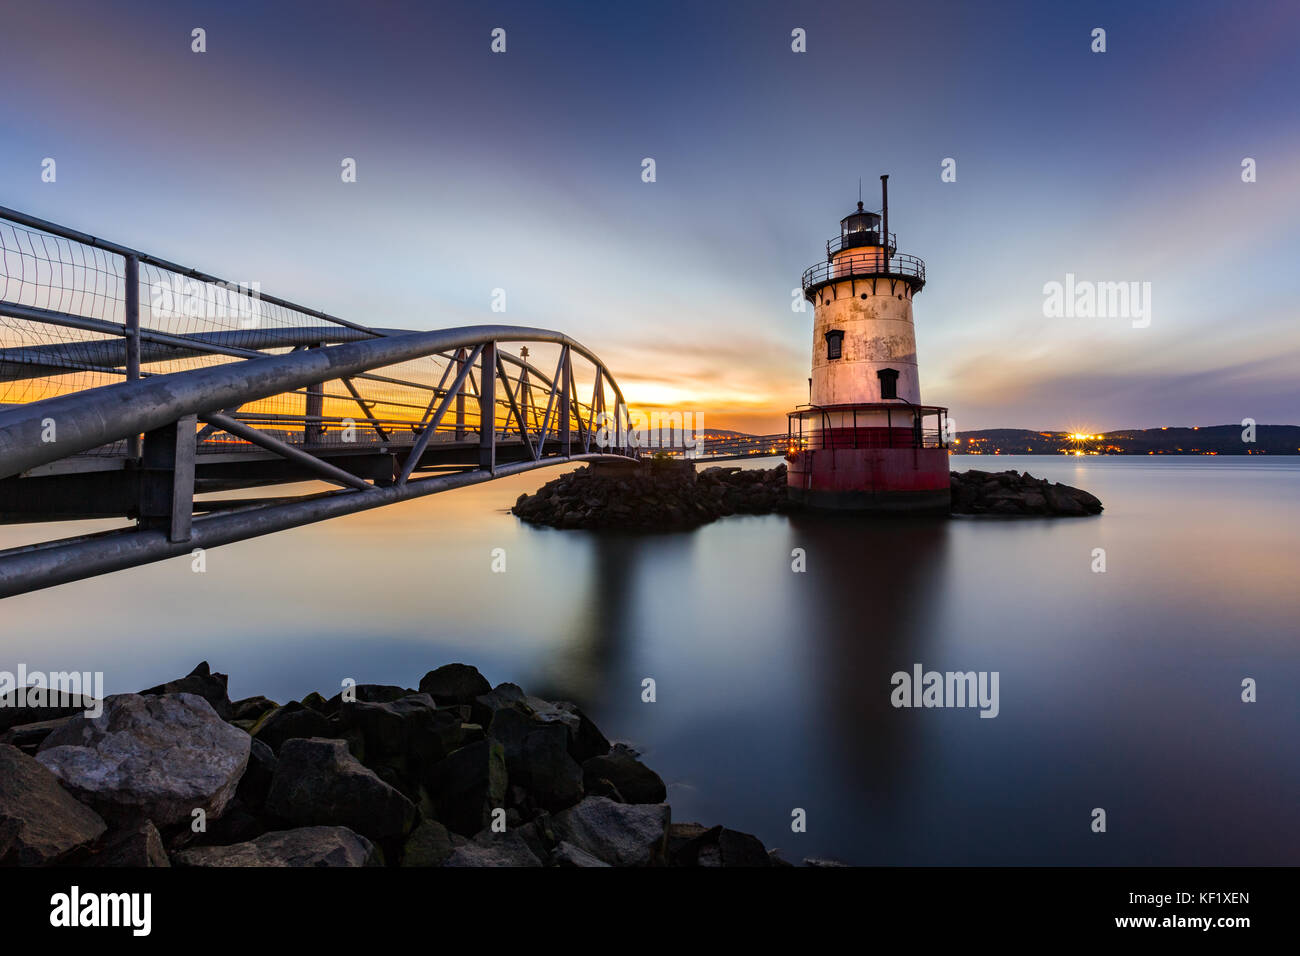 Sleepy Hollow Lighthouse (aka Tarrytown Light) at dusk. The cast iron tower was installed in 1883 and operated until 1961. Stock Photo